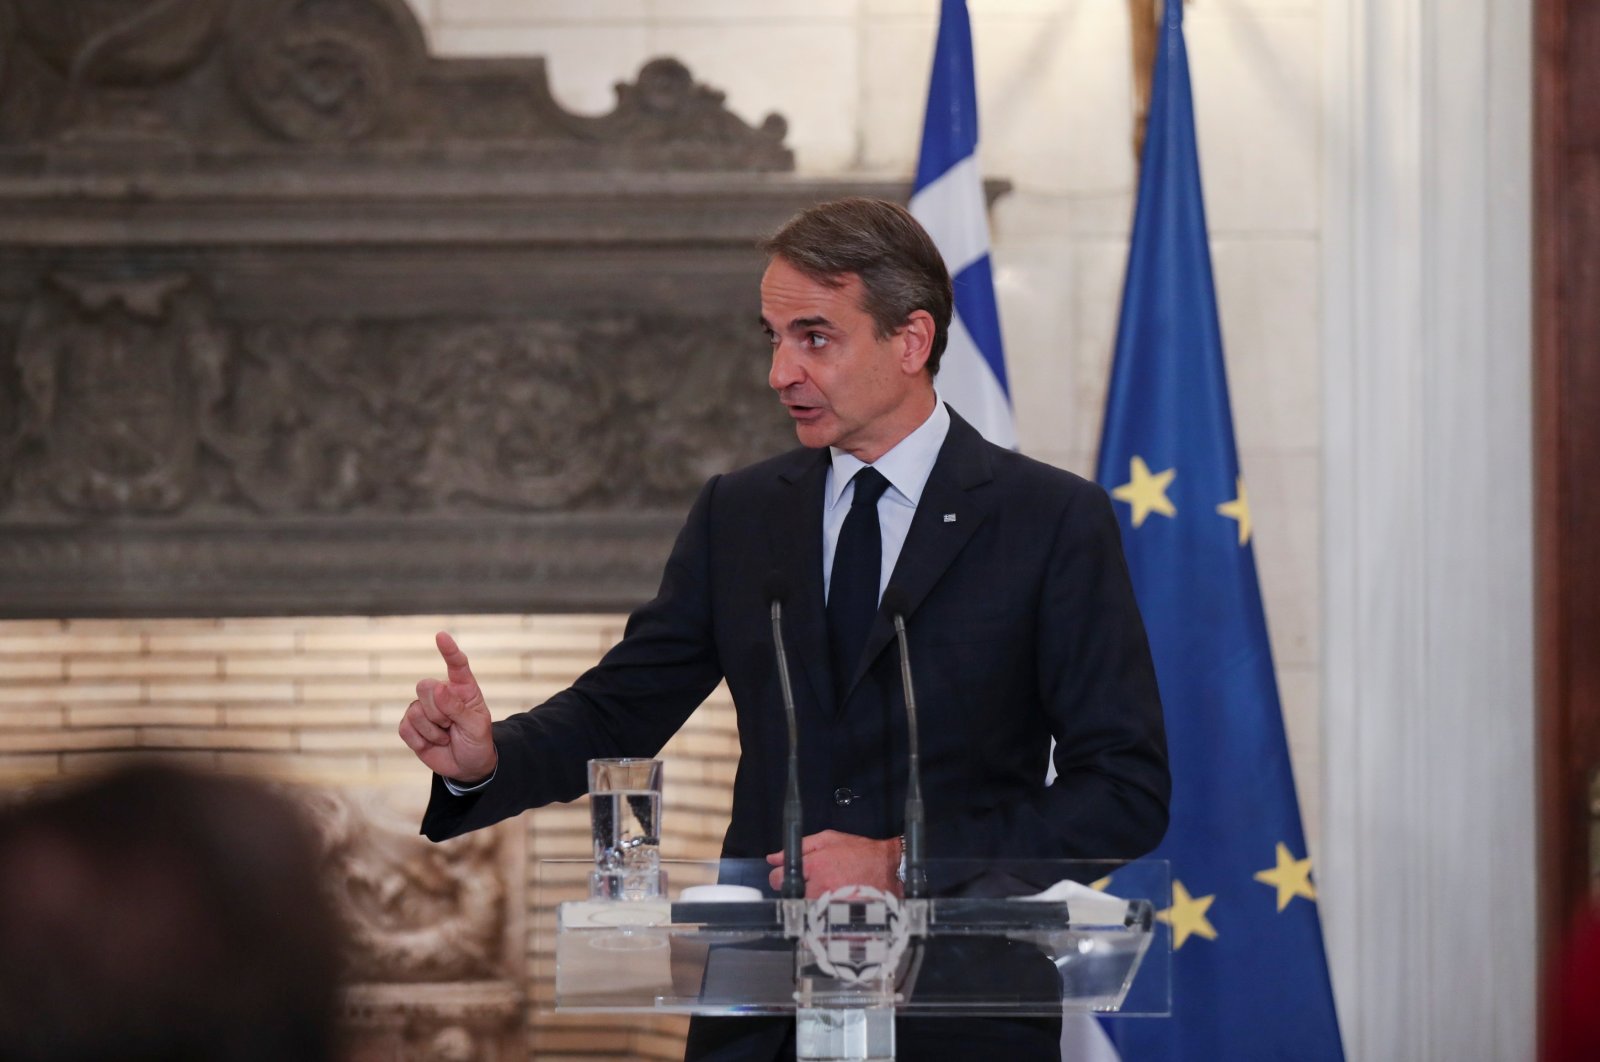 Greek Prime Minister Kyriakos Mitsotakis speaks during a joint news conference with Netherlands' Prime Minister Mark Rutte, Athens, Greece, Nov. 9, 2021. (Reuters Photo)